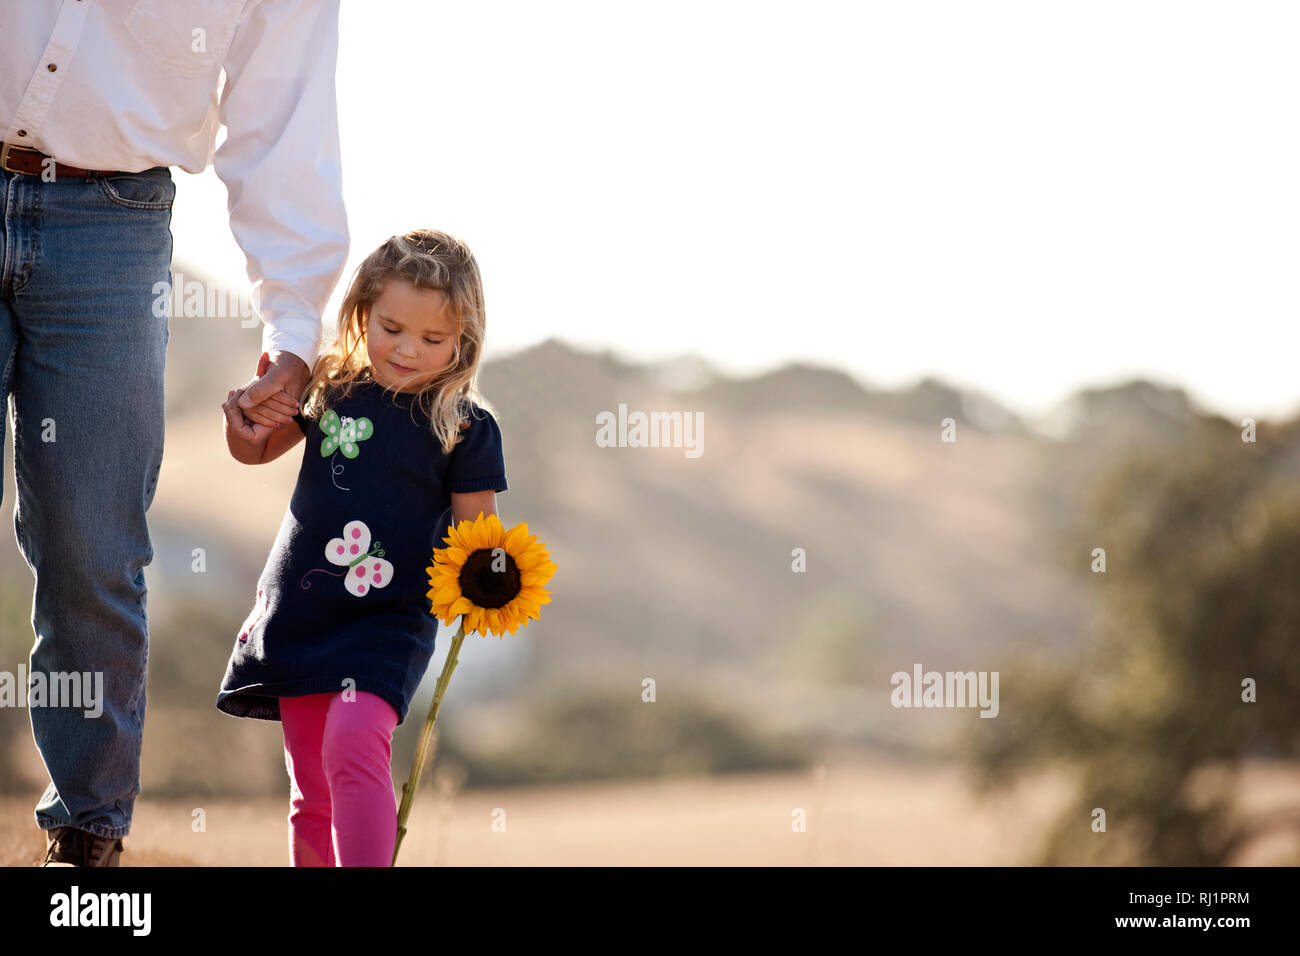 Young girl walking hand in hand with her father and carrying sunflower. Stock Photo